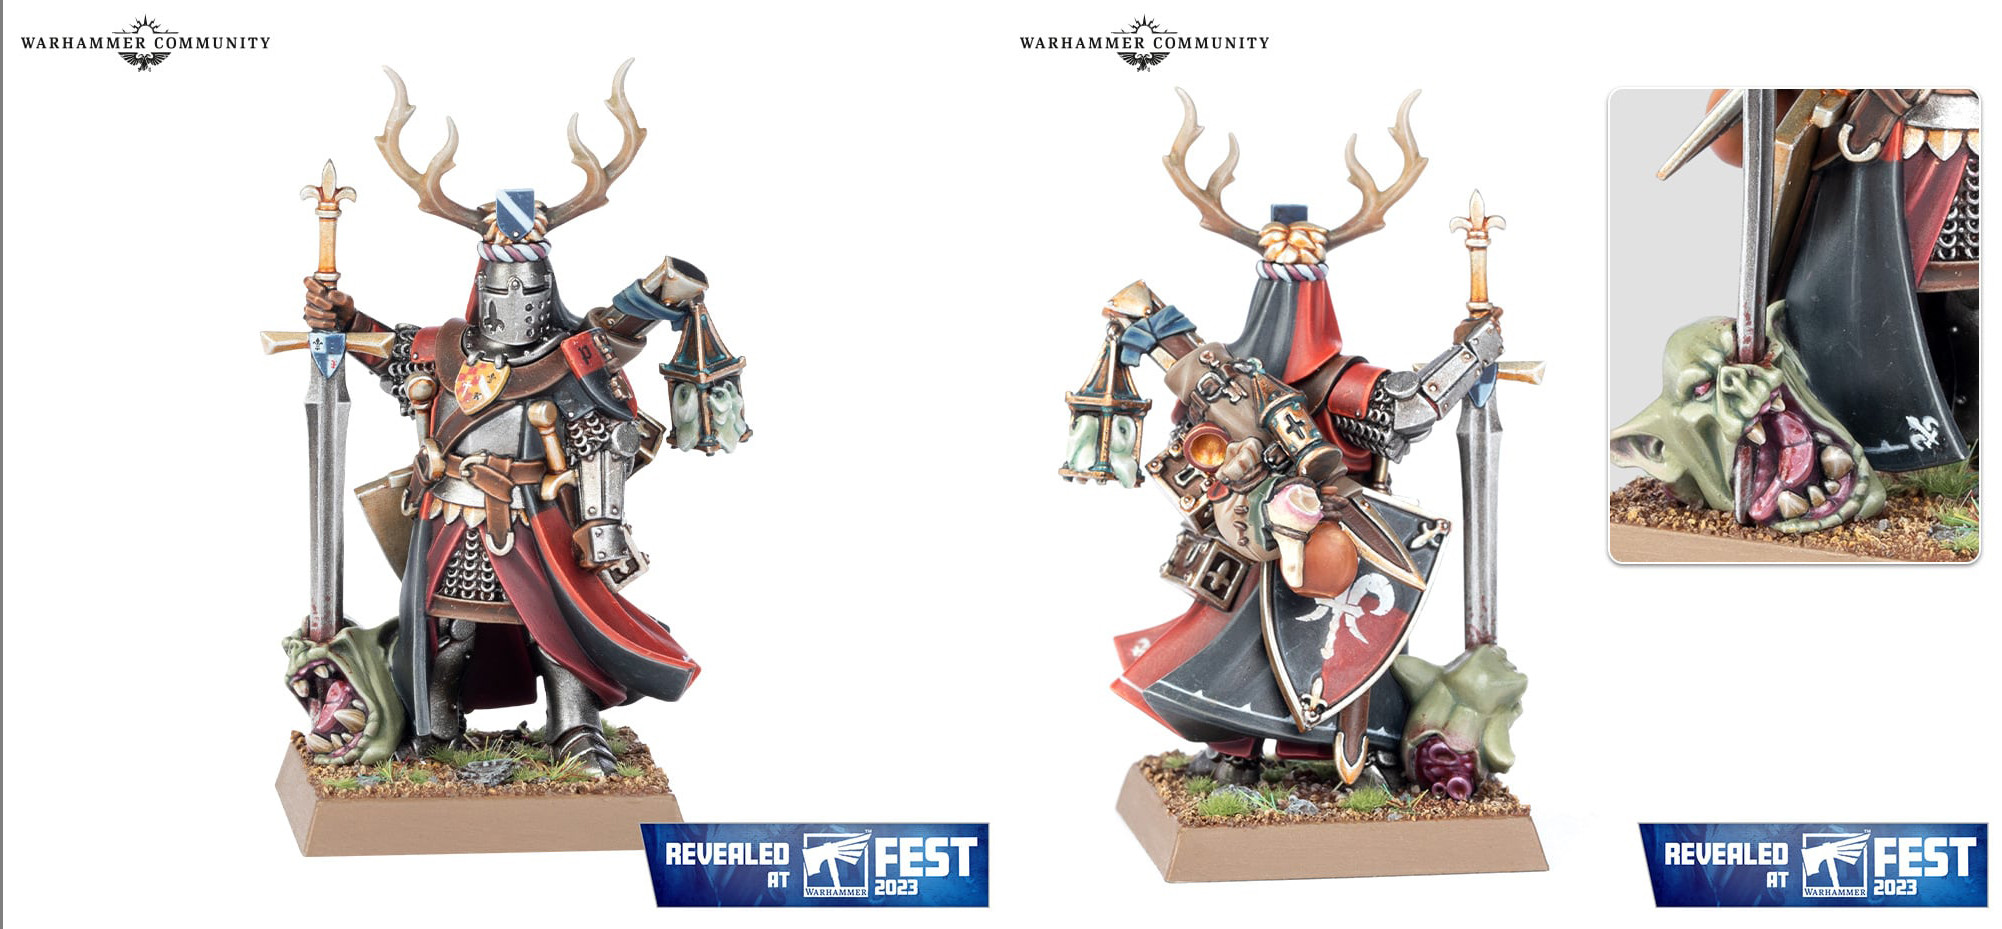 The knight is based on this model that was revealed on Warhammerfest